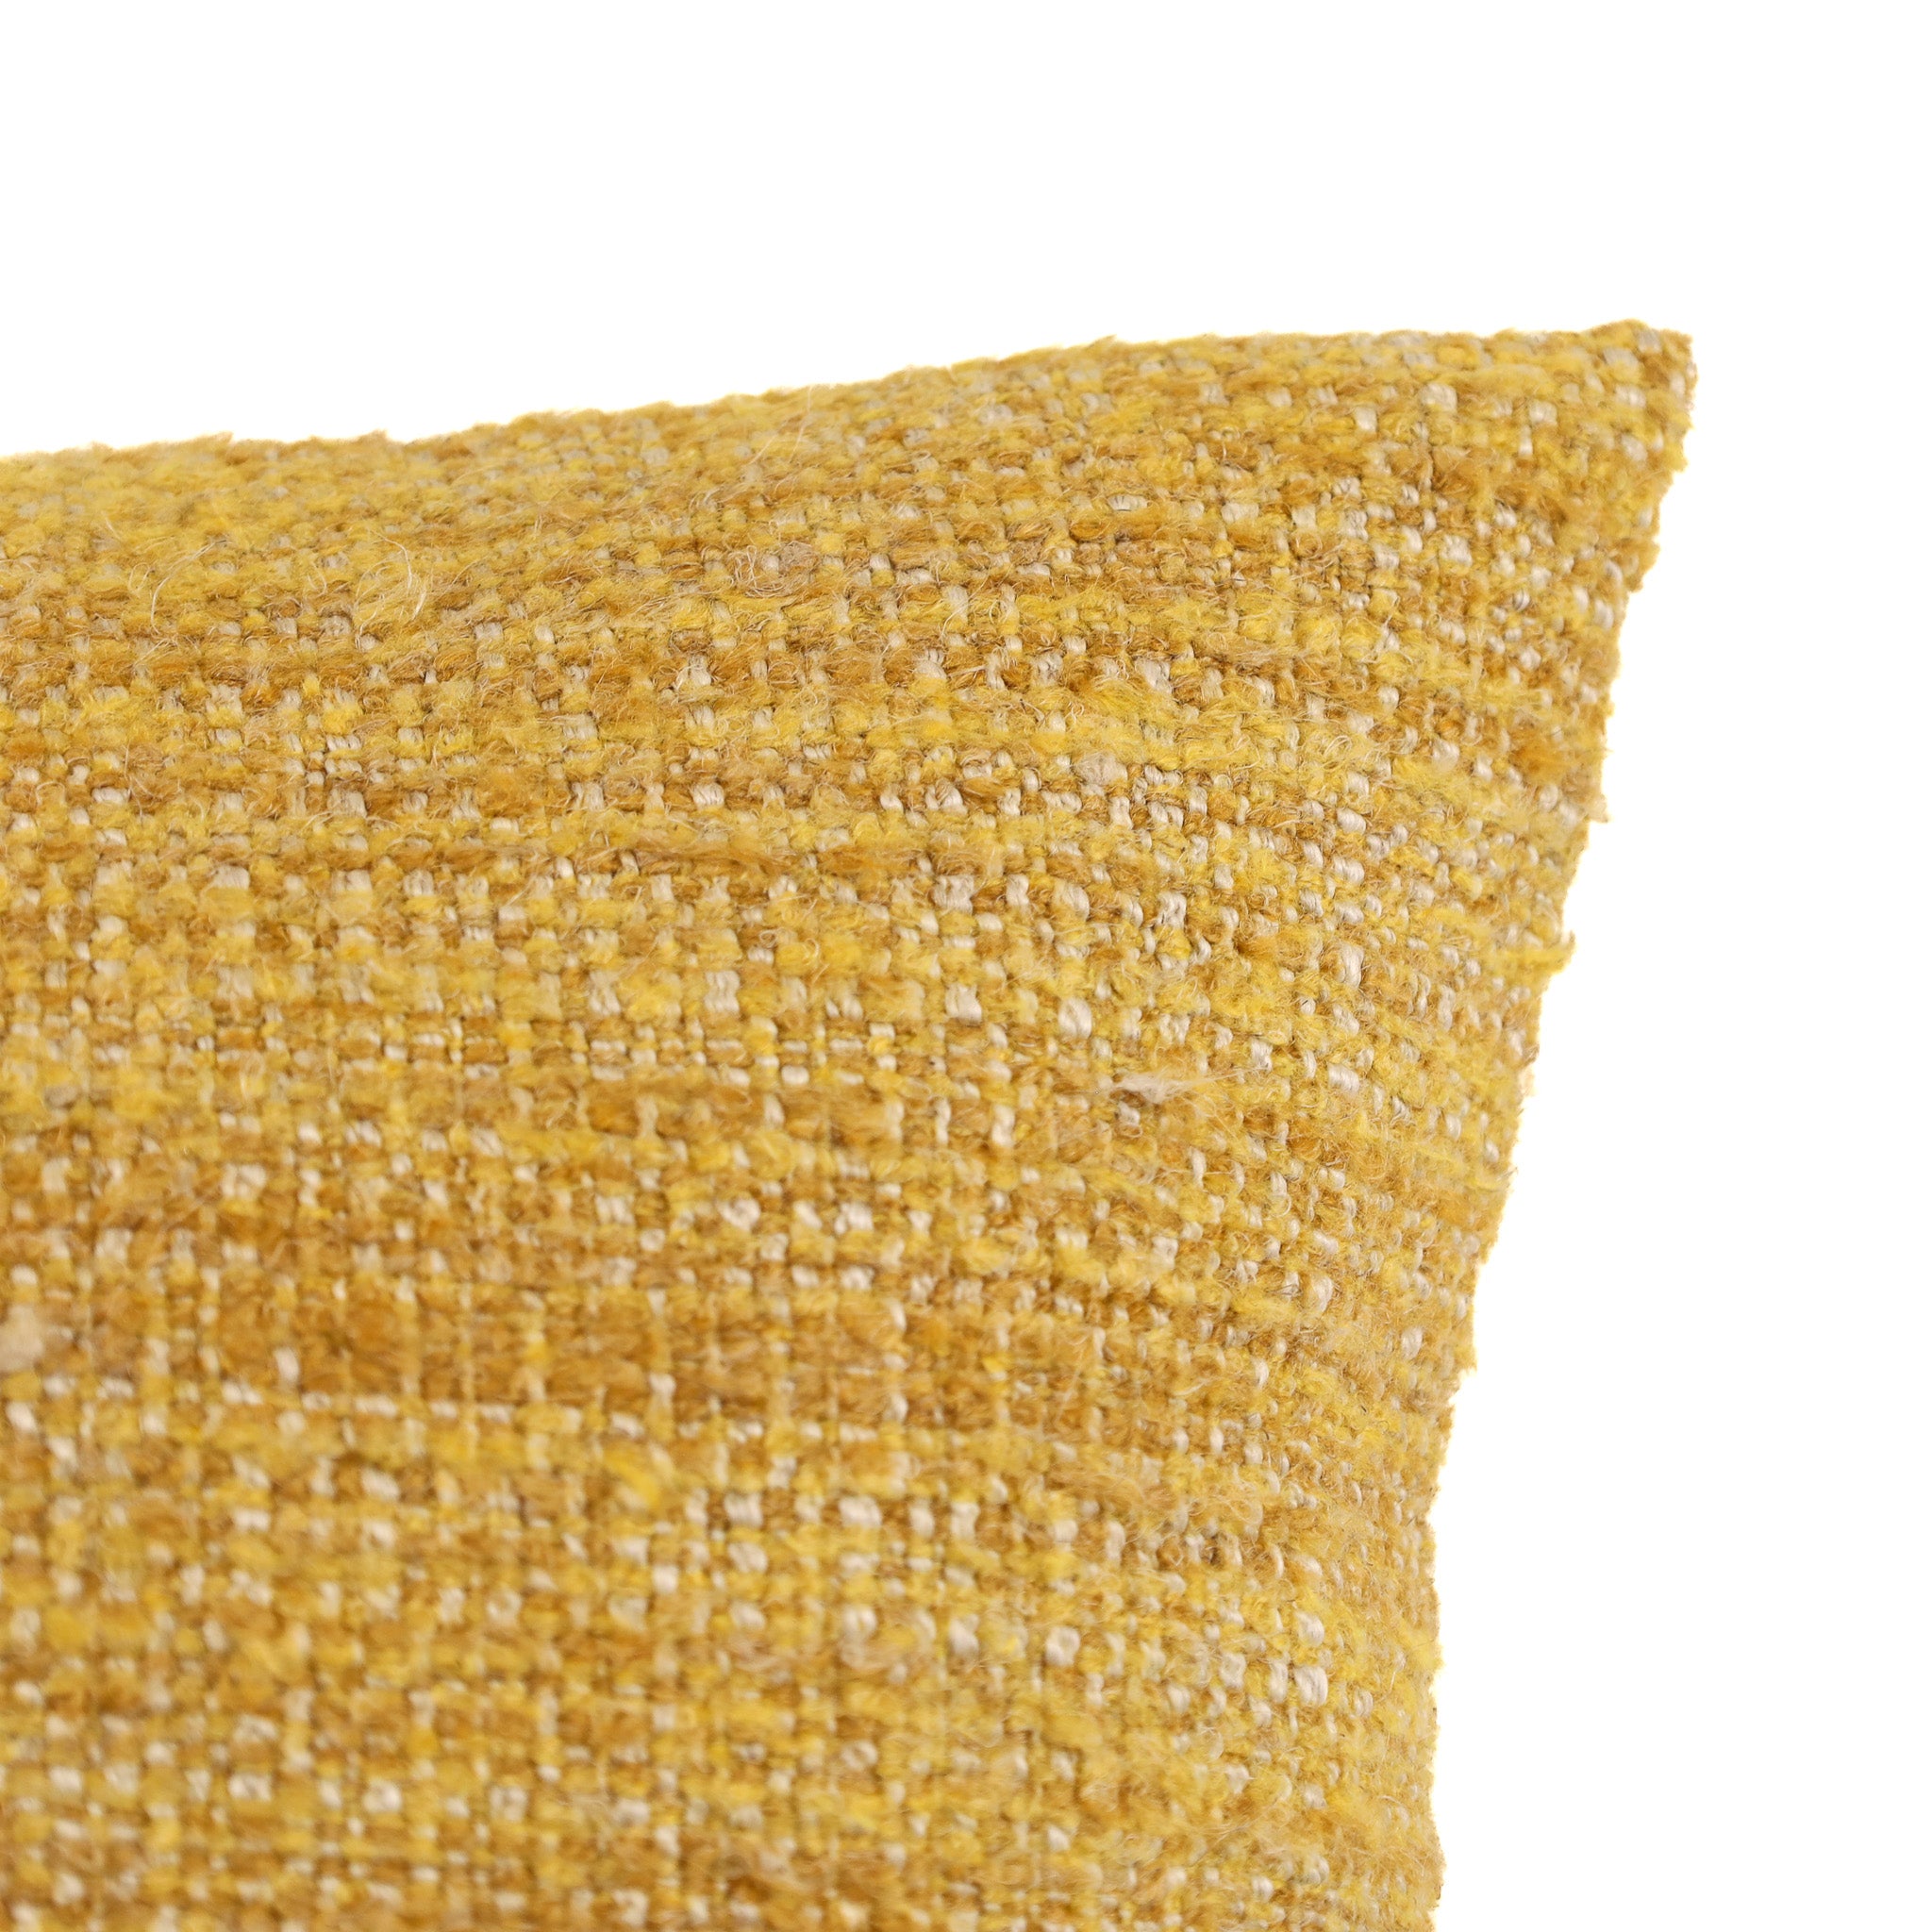 naka pillow by uniquity at adorn.house